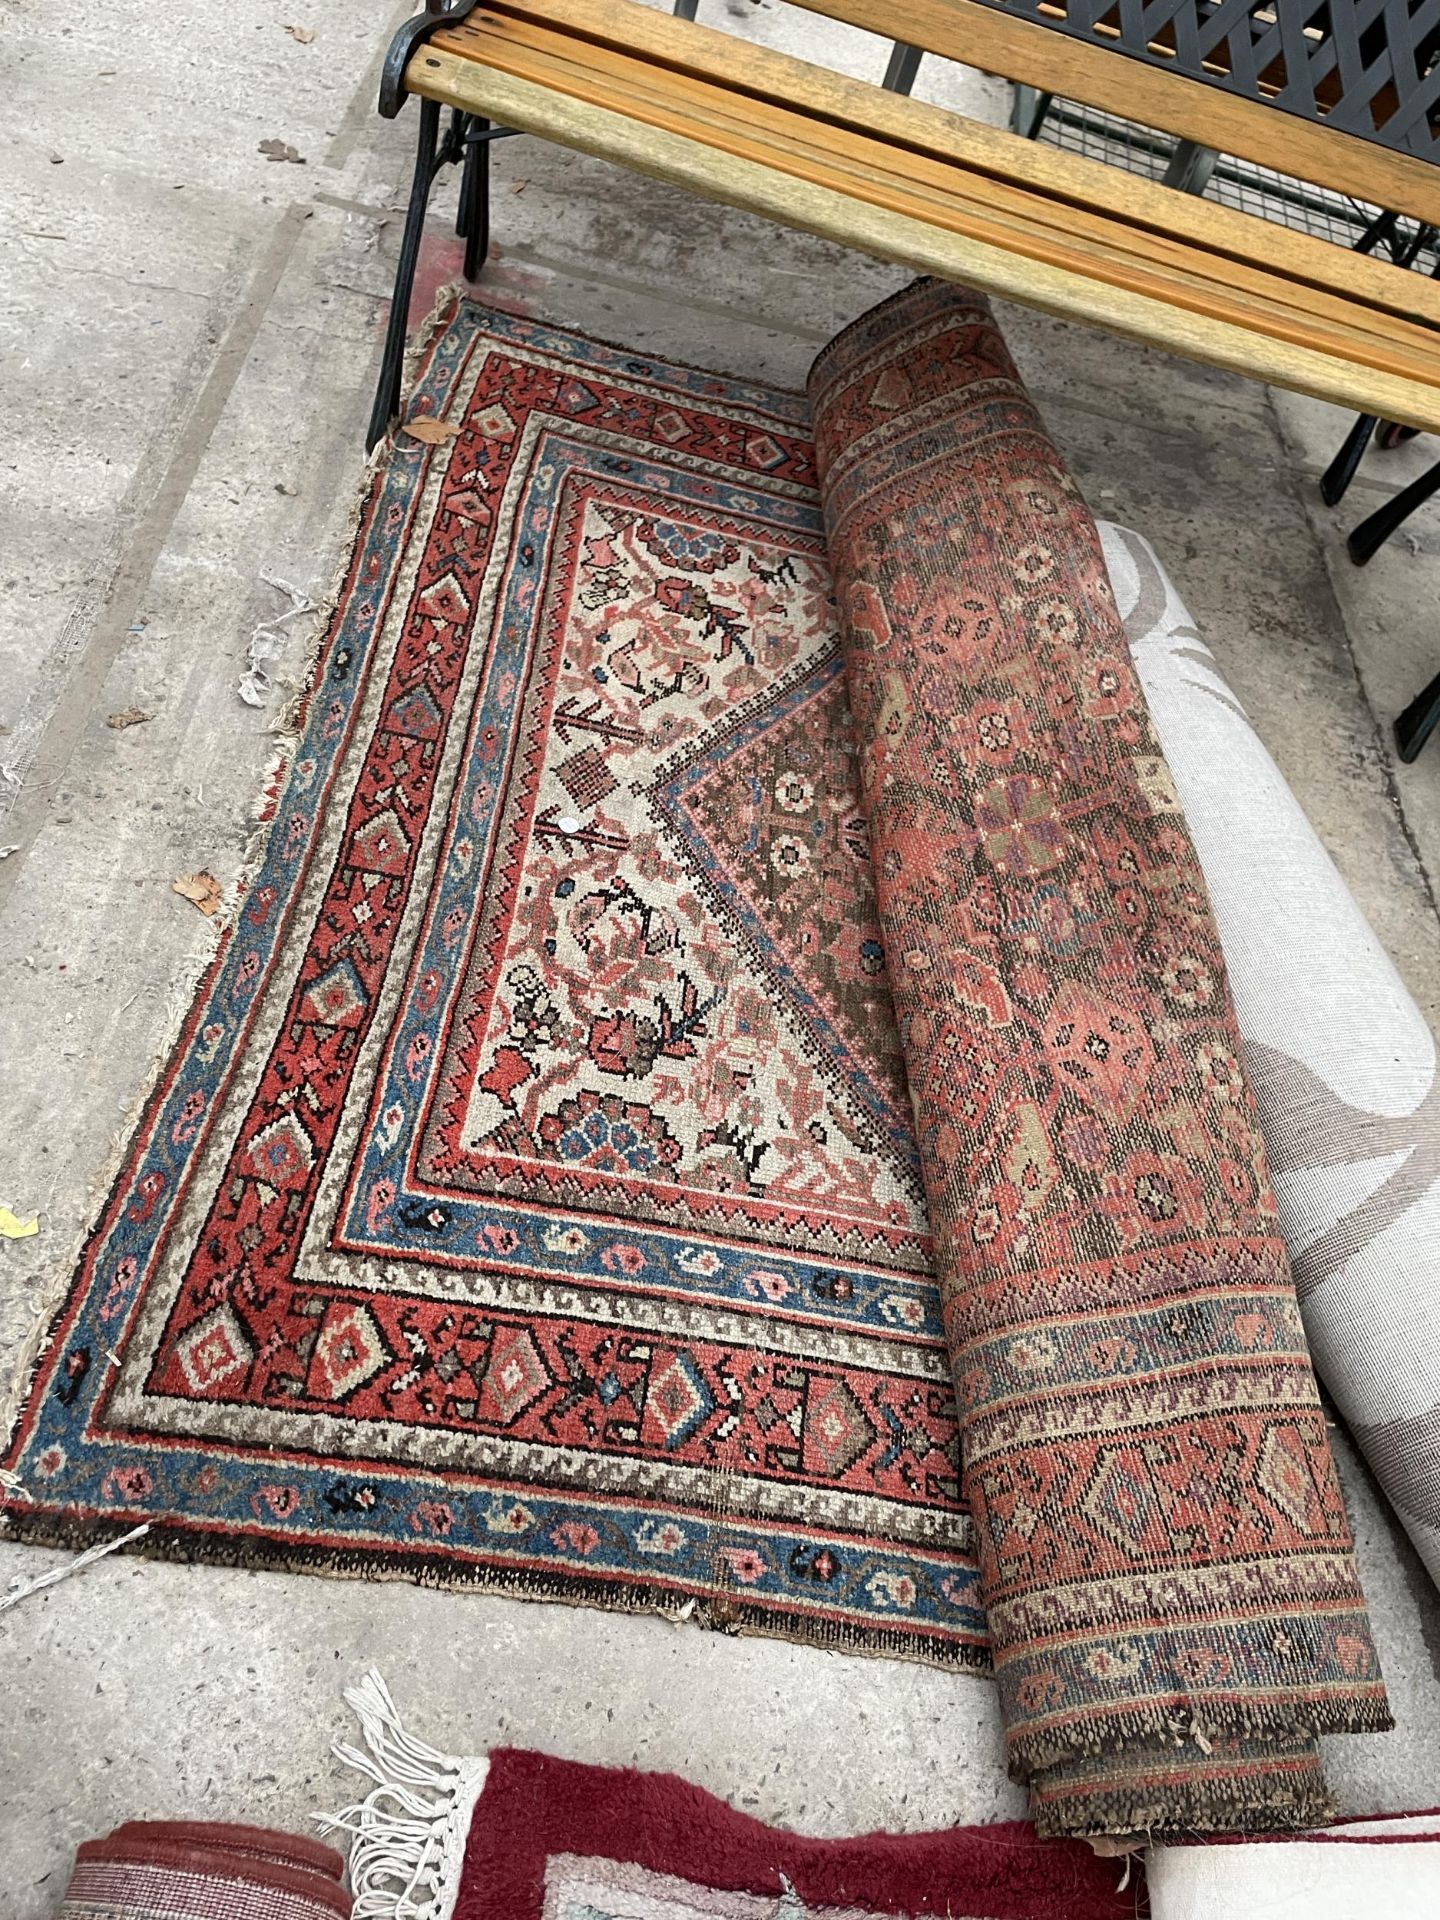 A SMALL RED AND BLUE PATTERNED FRINGED RUG